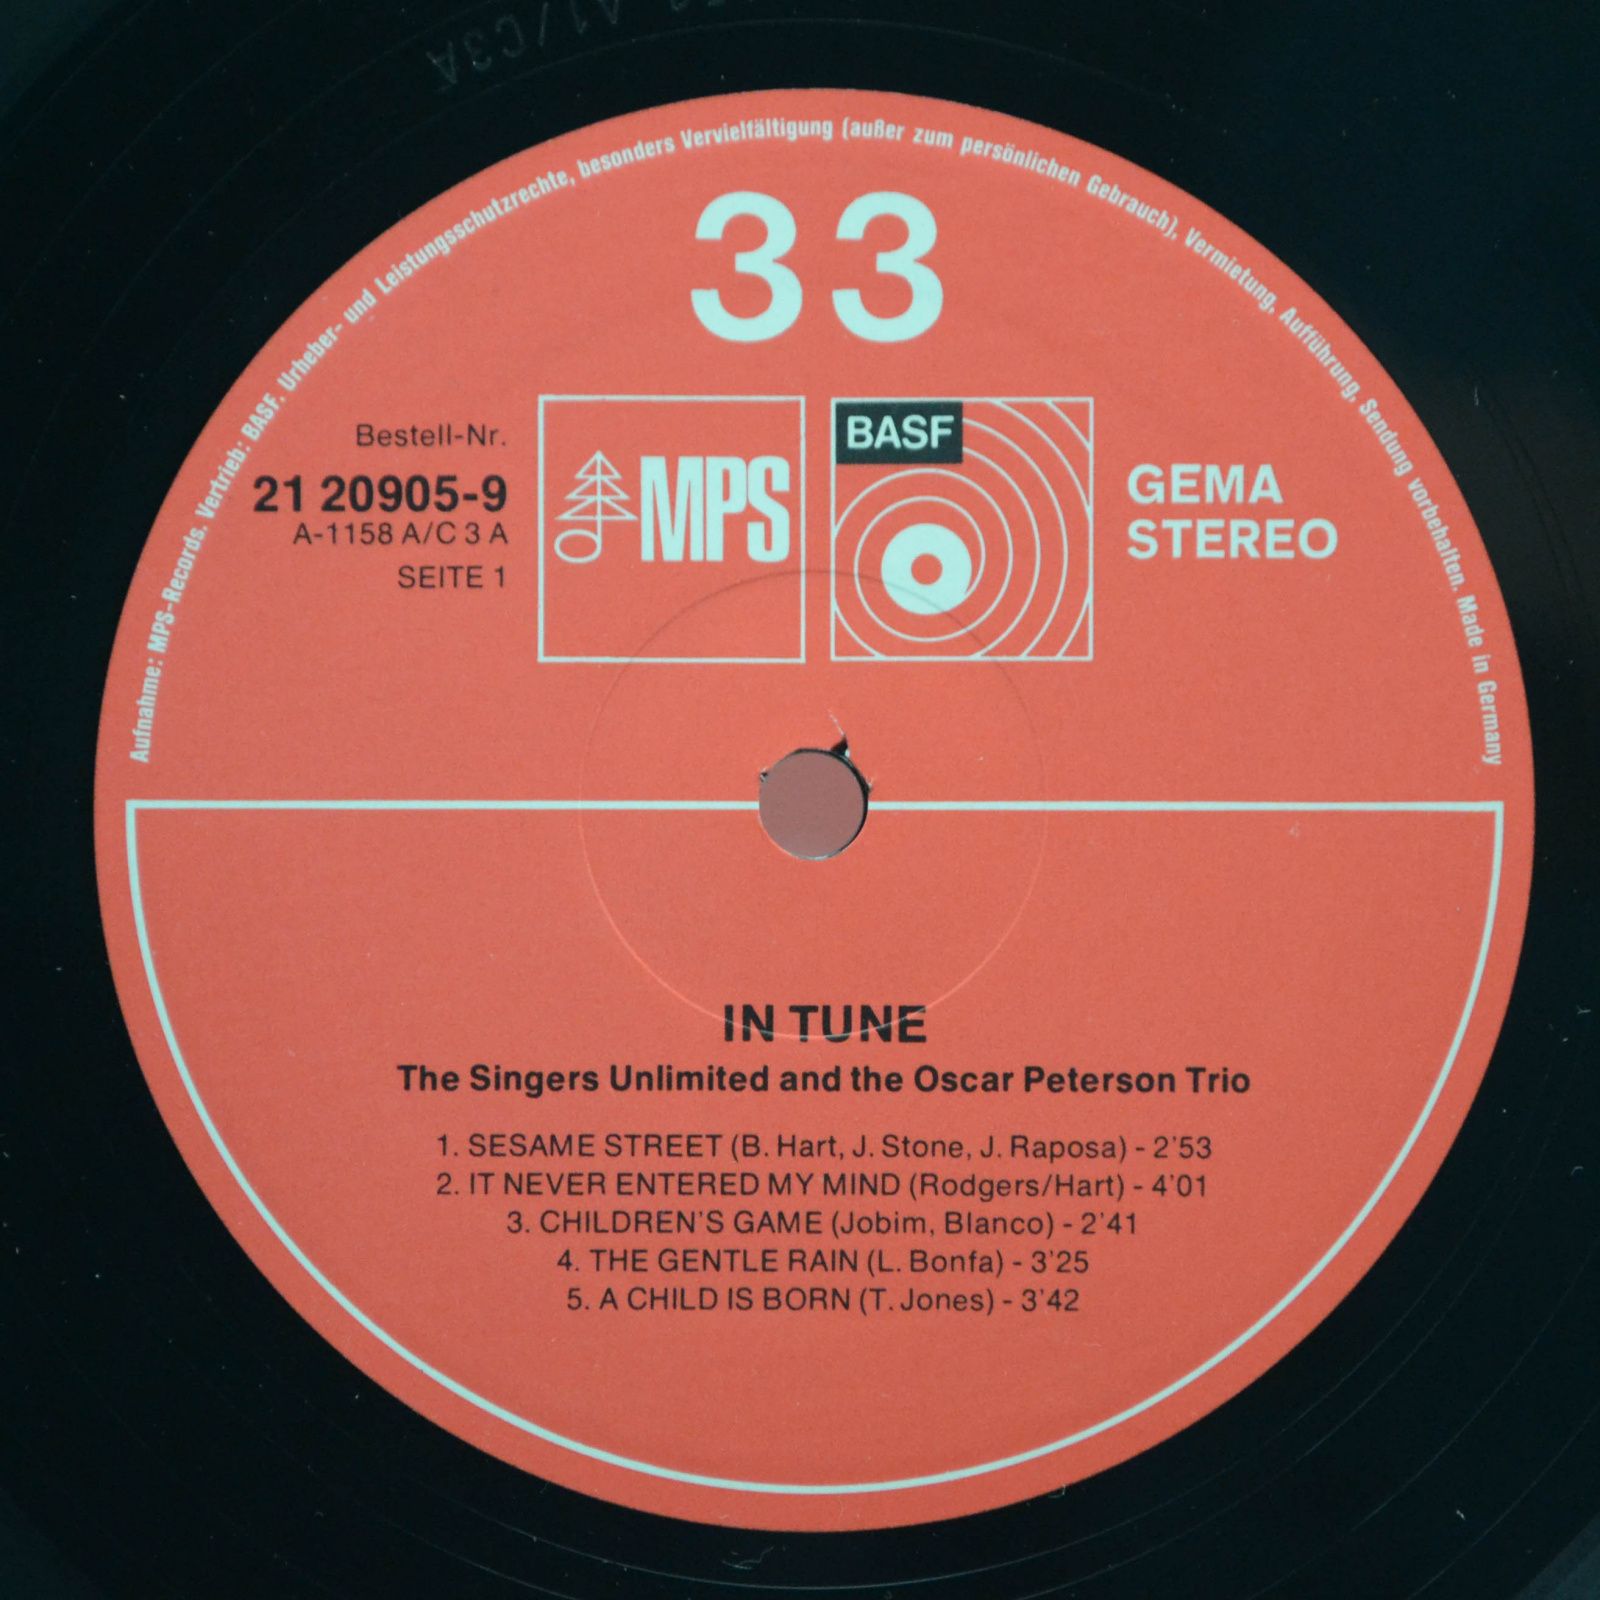 Oscar Peterson Trio + The Singers Unlimited — In Tune, 1973